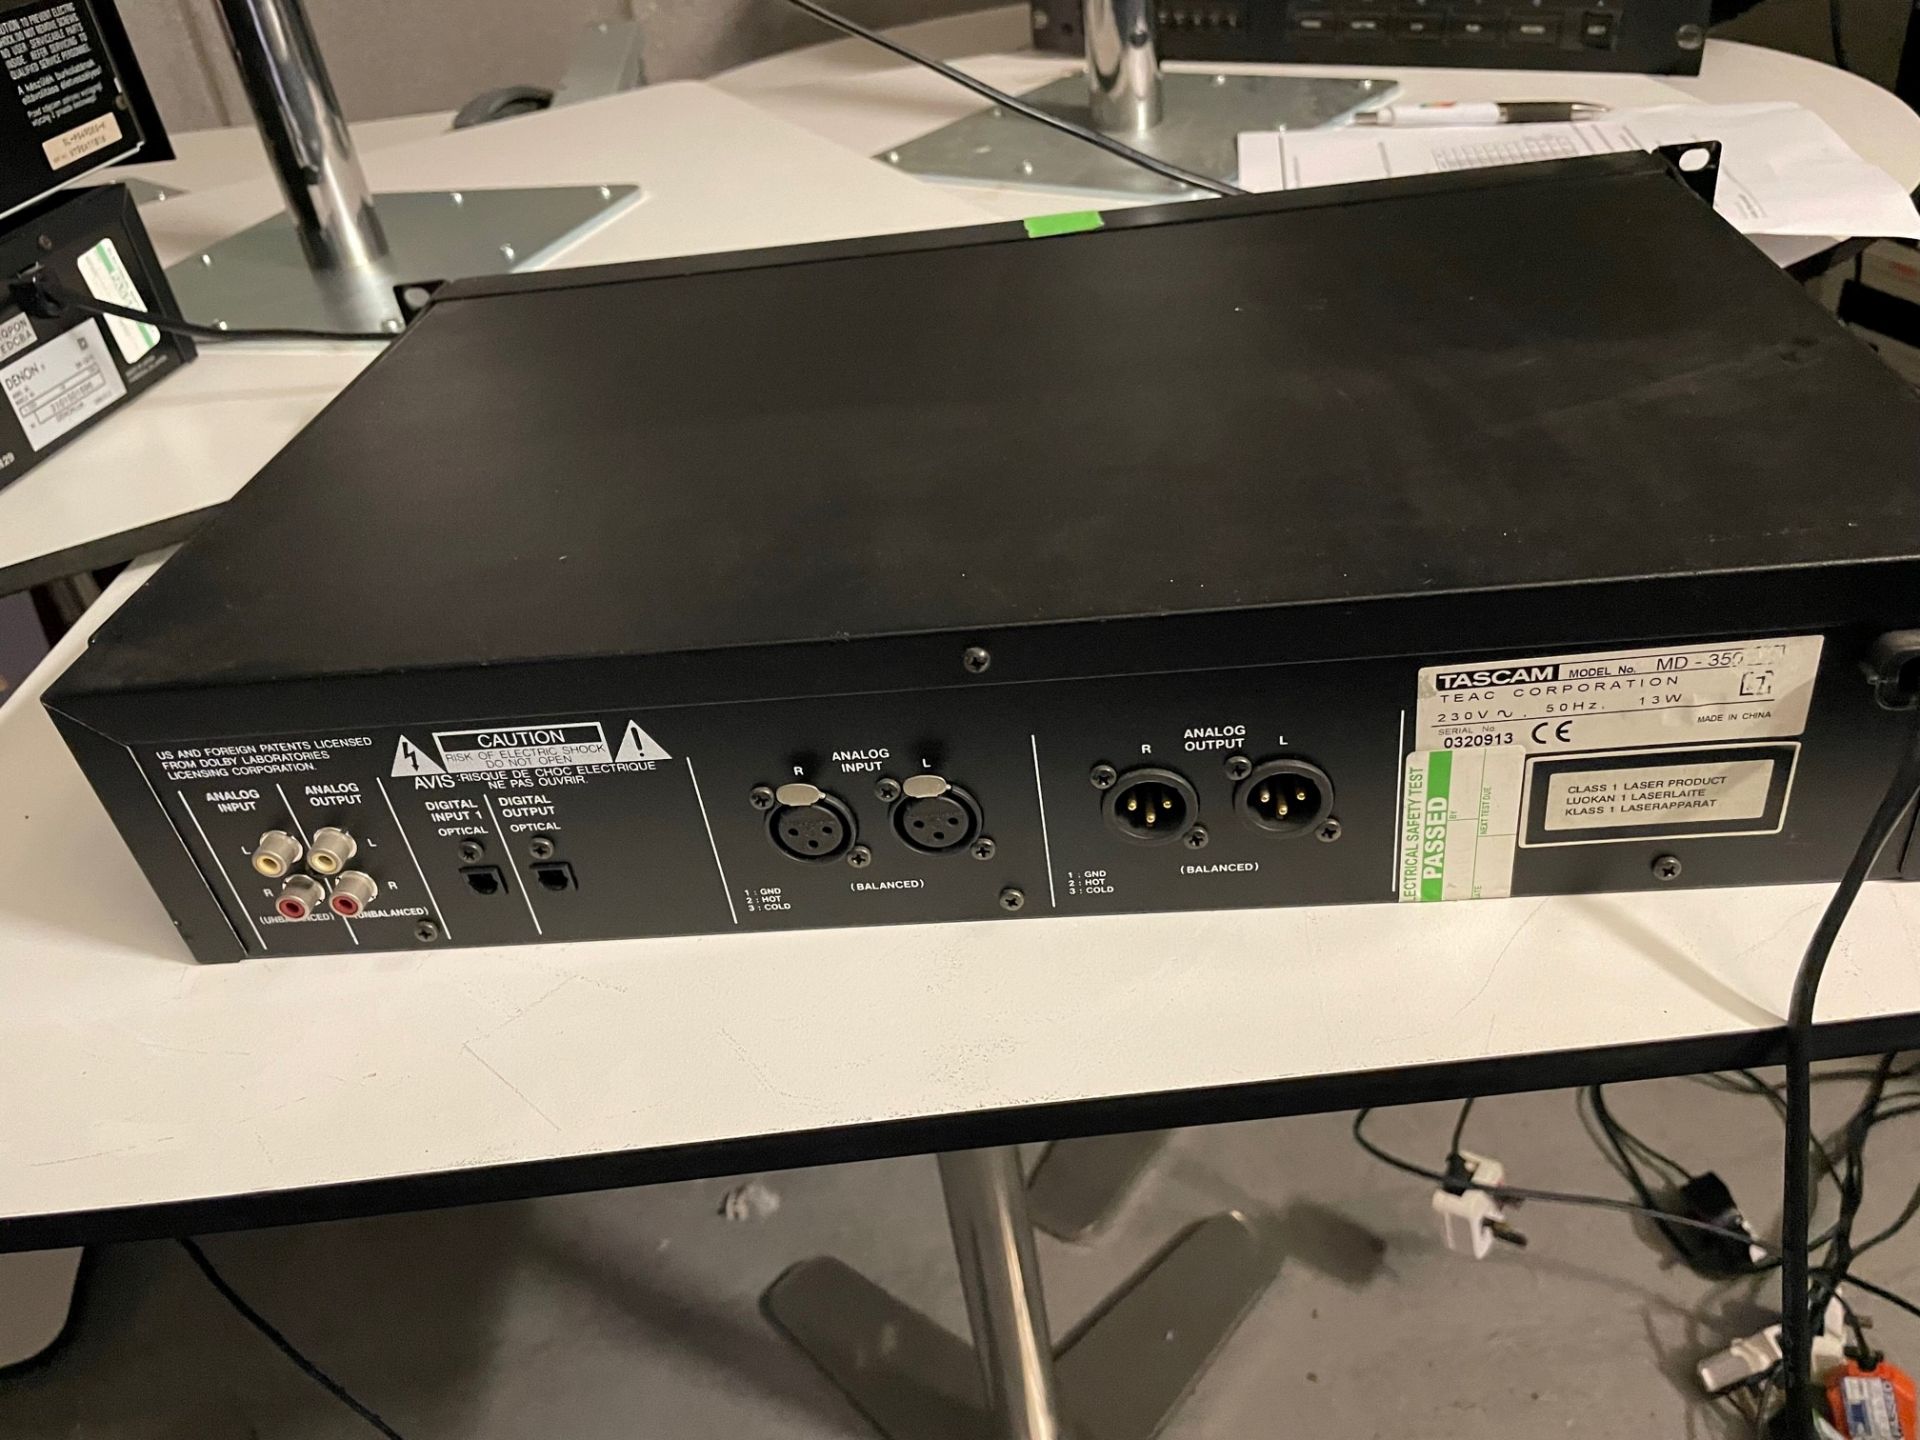 TASCAM MD-350 Serial No. 0320910 - Image 2 of 2